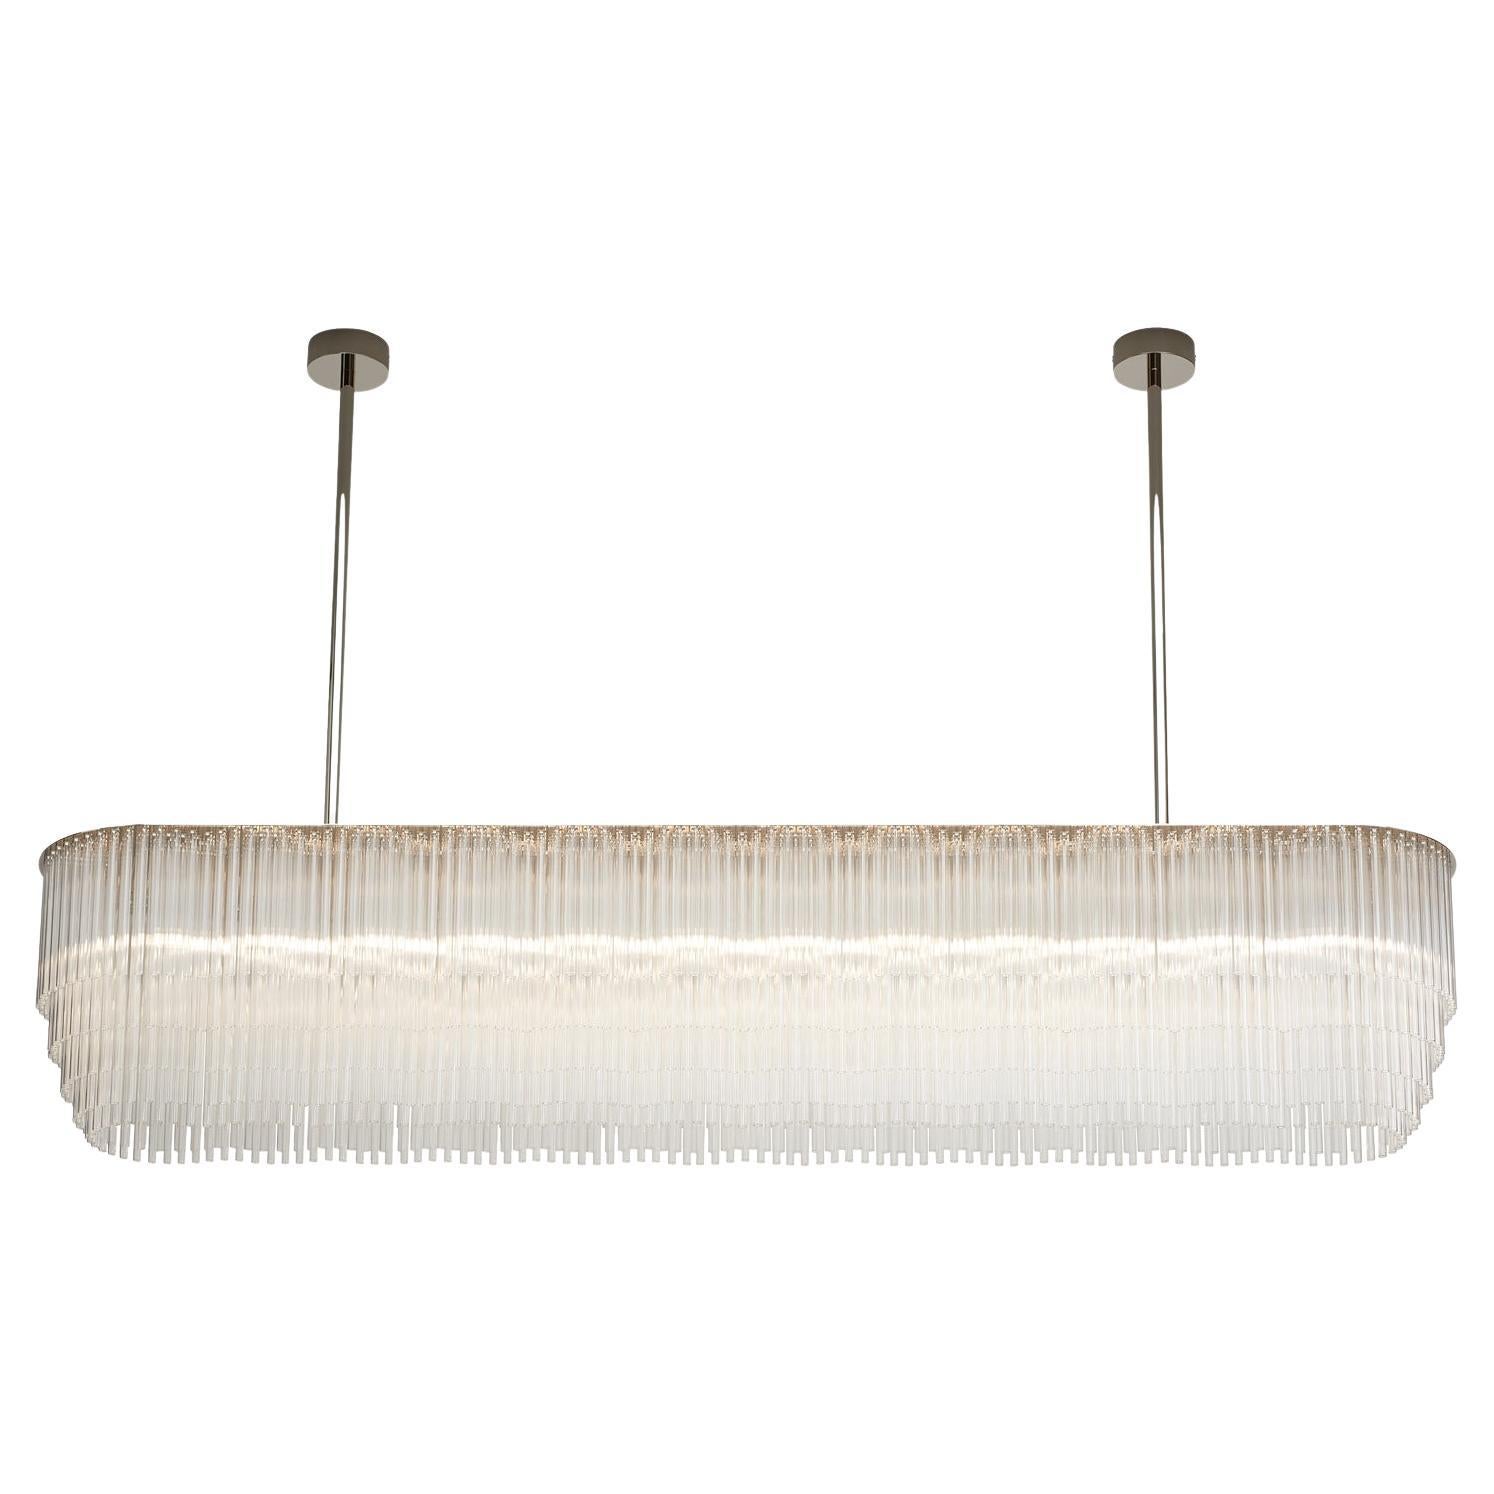 Linear Chandelier 1479mm / 58.25" in Polished Nickel with Tiered Glass Profile For Sale